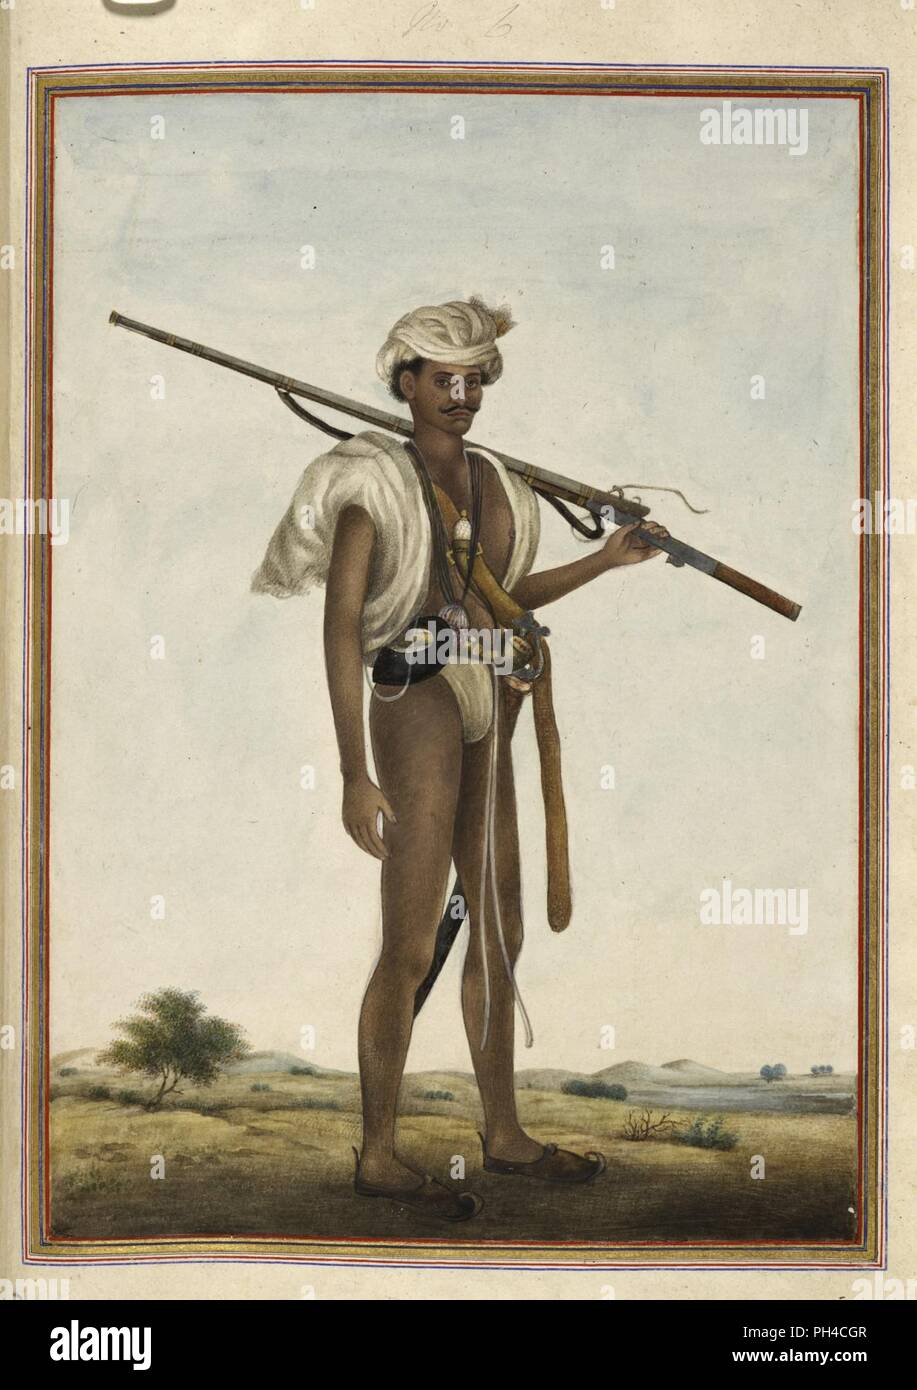 Tashrih al-aqvam, an account of origins and occupations of some of the sects, castes and tribes of India. - 'Warrior (Mevati). Mevati, a Kshatriya group who lived in the region south-west of Delhi and were warriors more u0082. Stock Photo